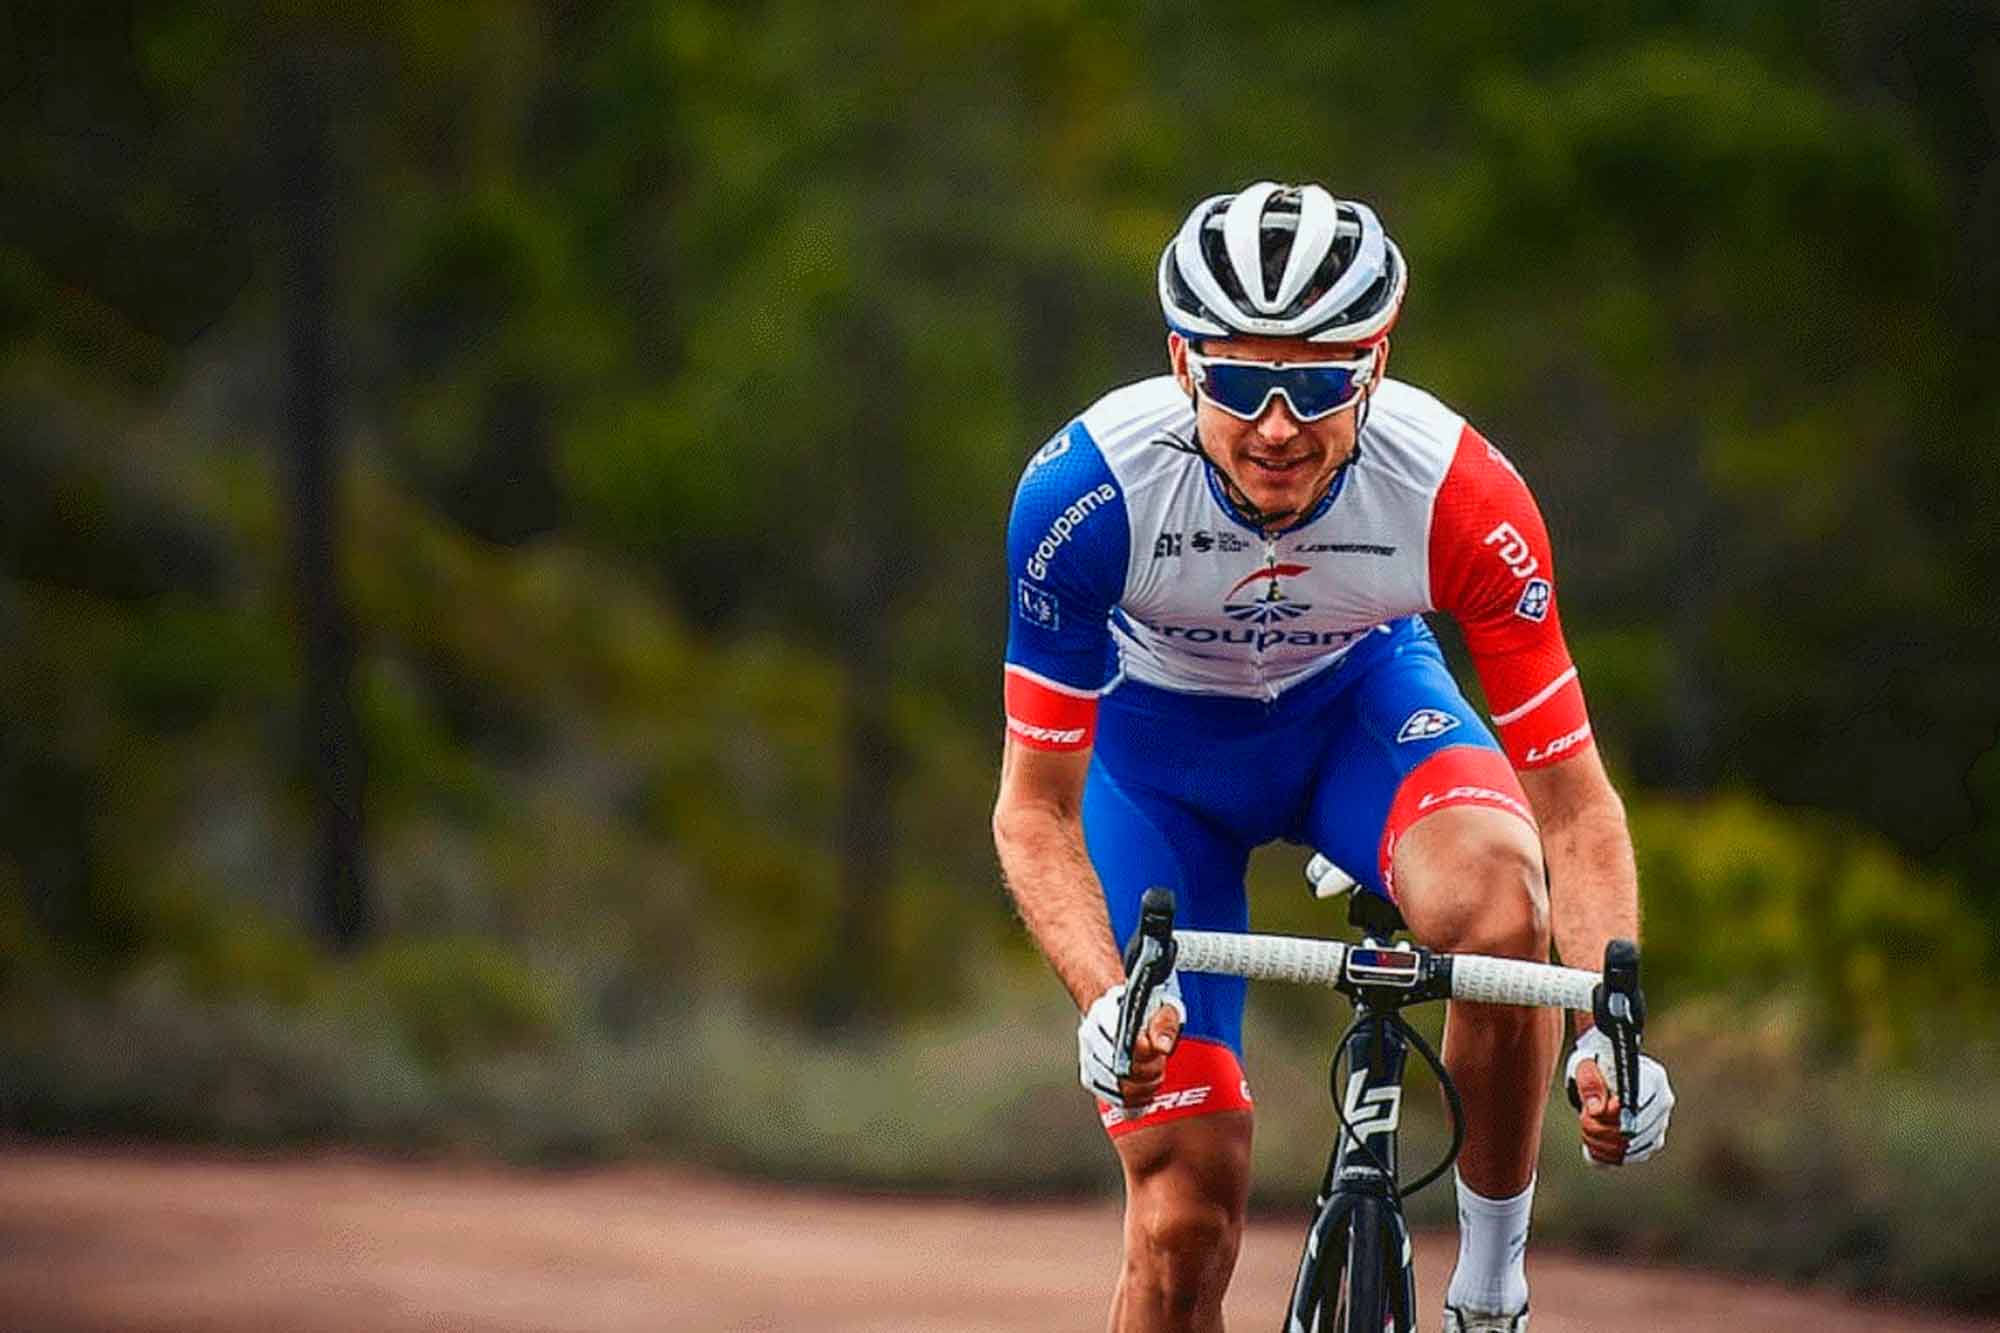 Biomin protects top cyclist’s teeth - Dentistry